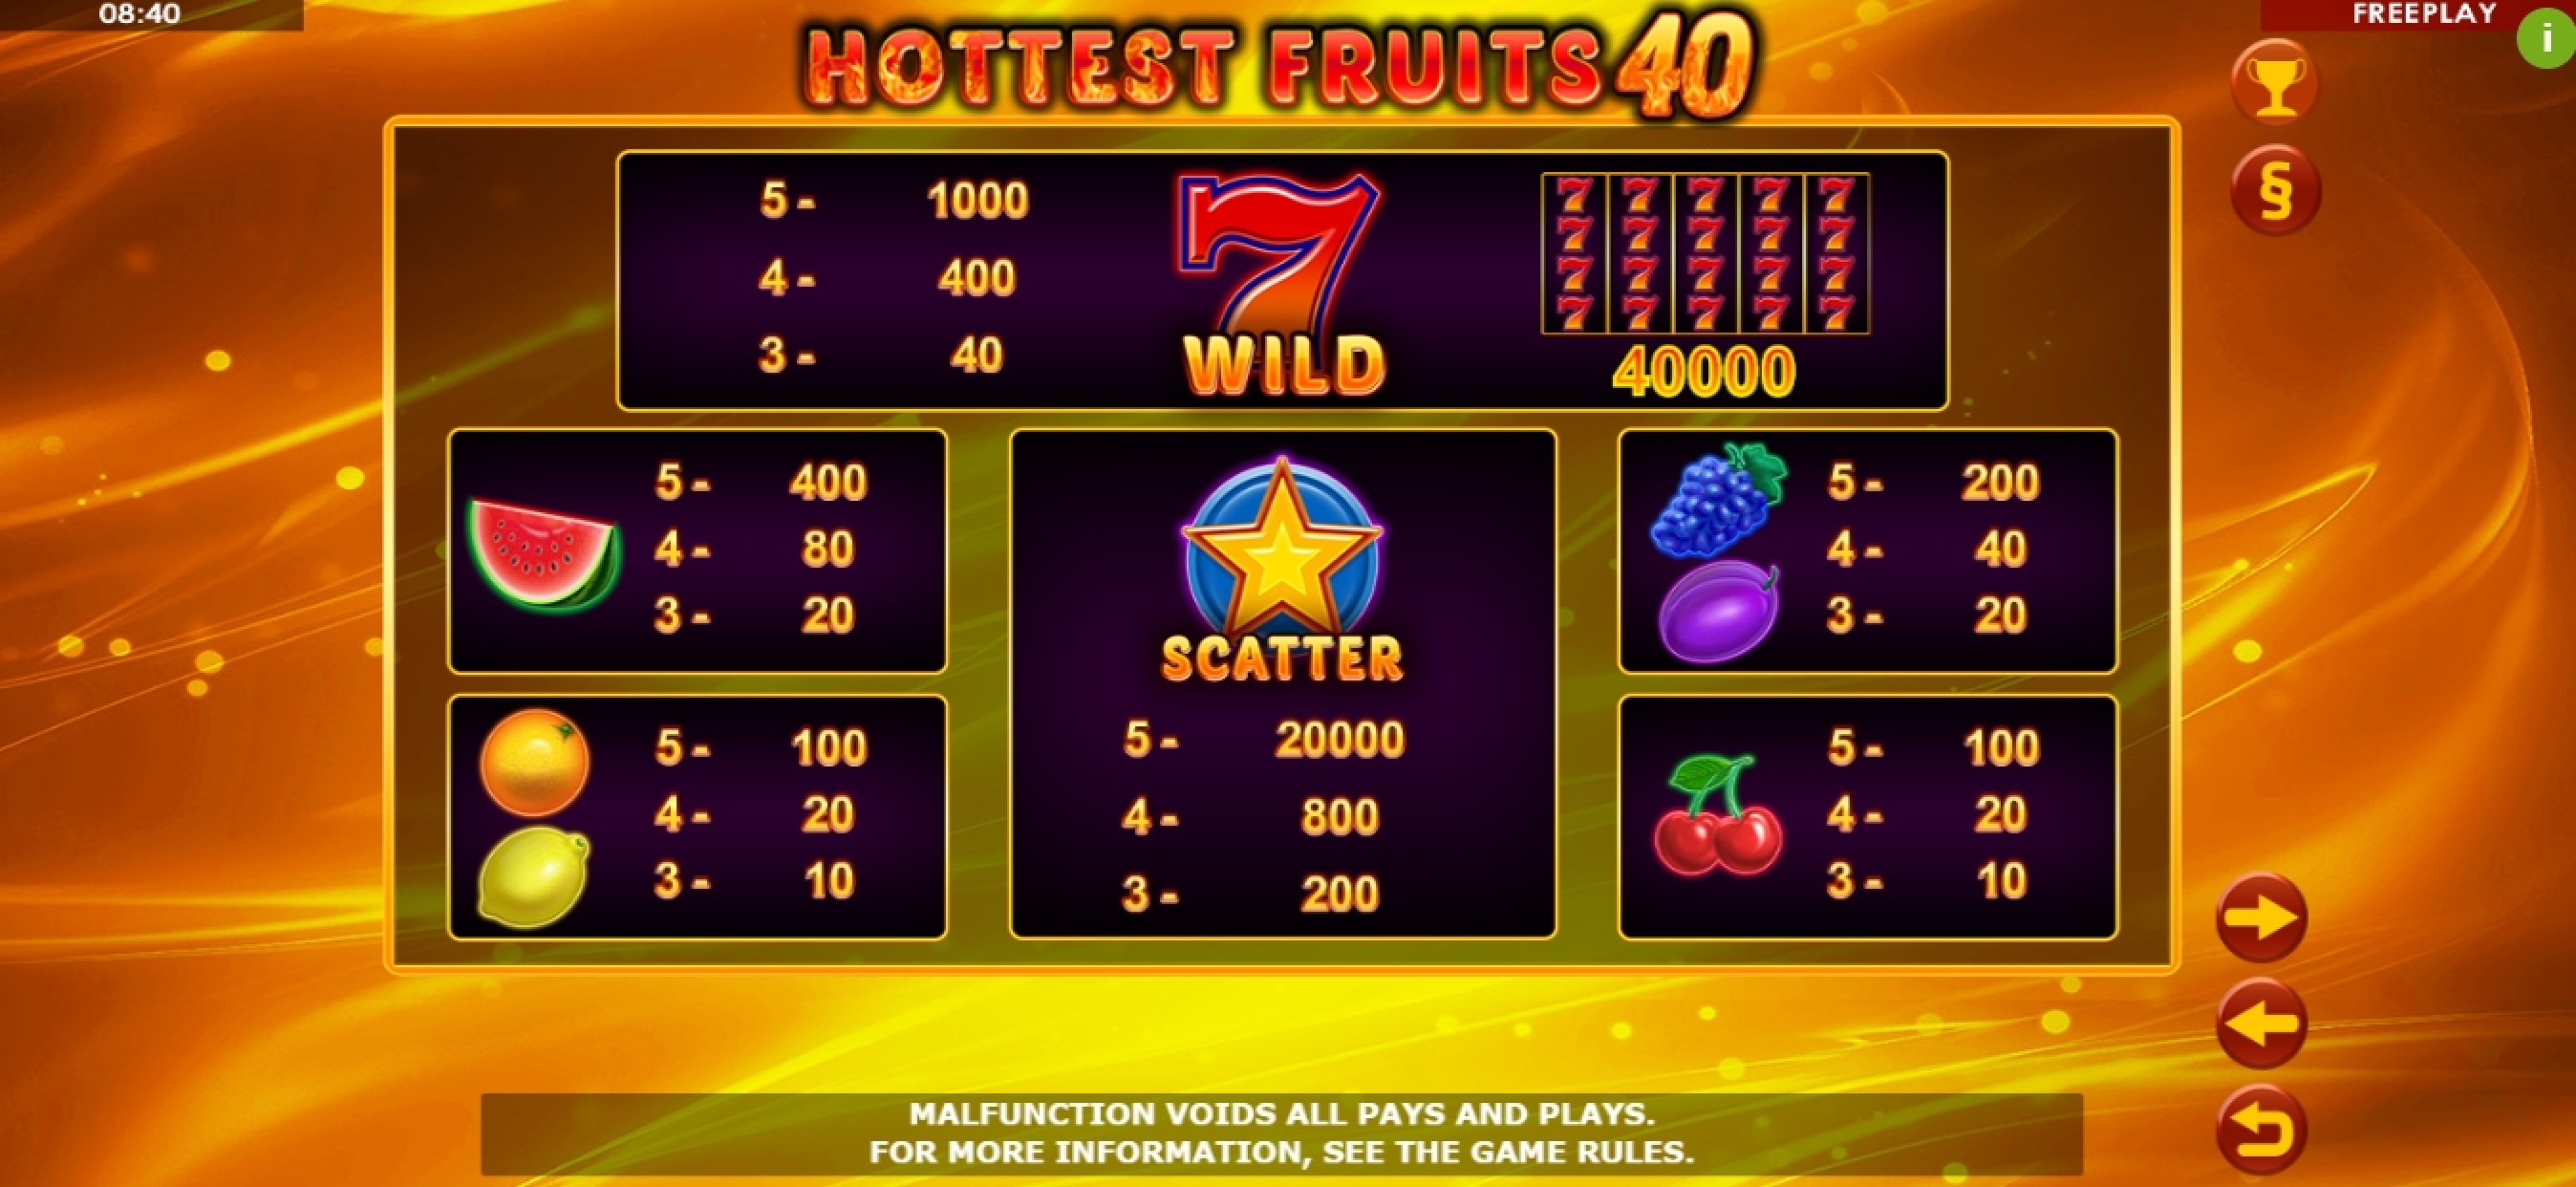 Info of Hottest Fruits 40 Slot Game by Amatic Industries